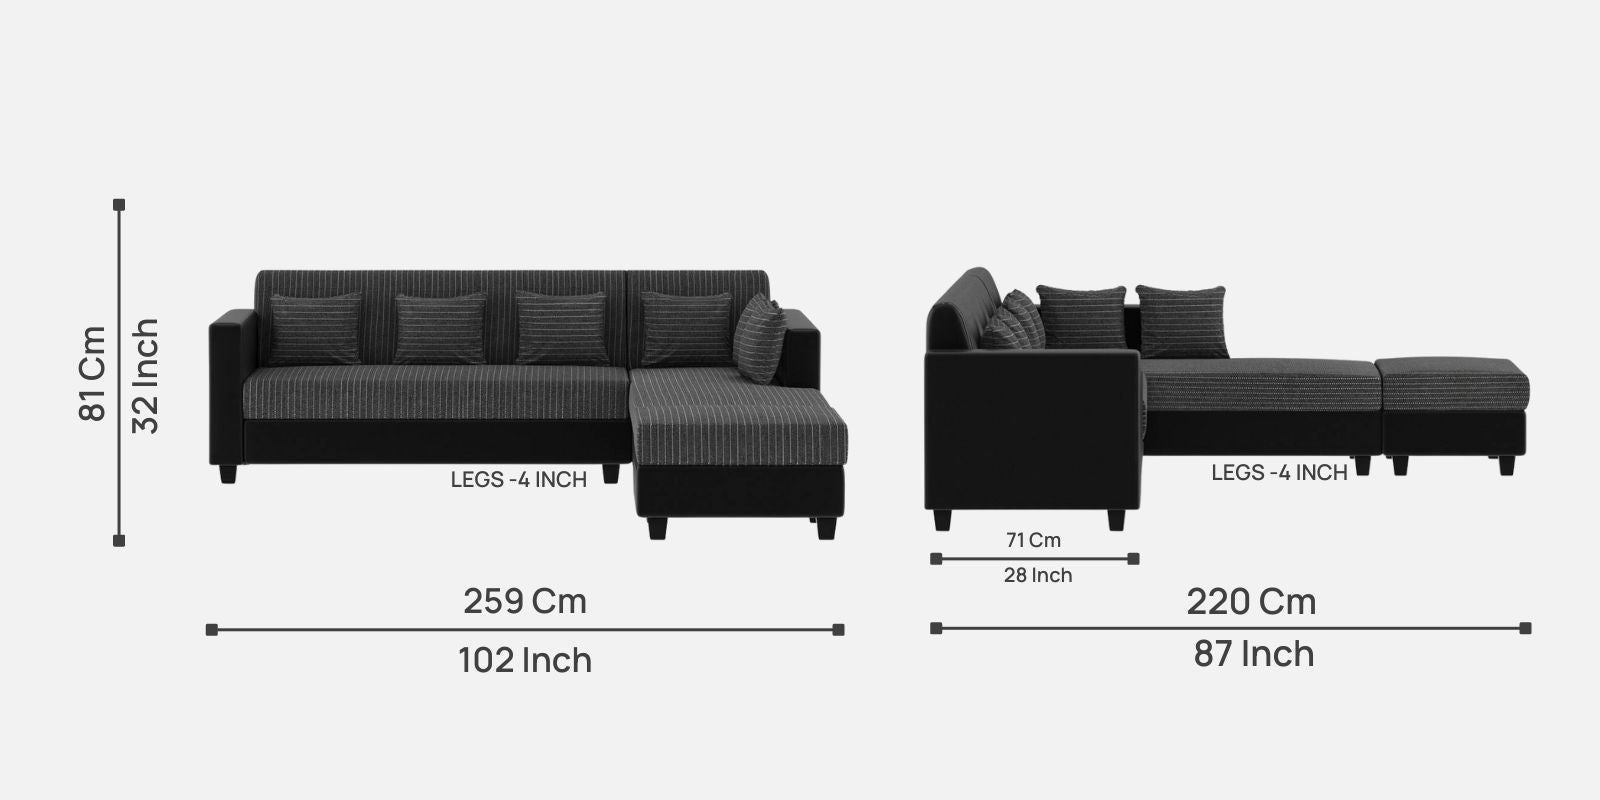 Baley Fabric LHS Sectional Sofa (3 + Lounger) In Lama Black Colour